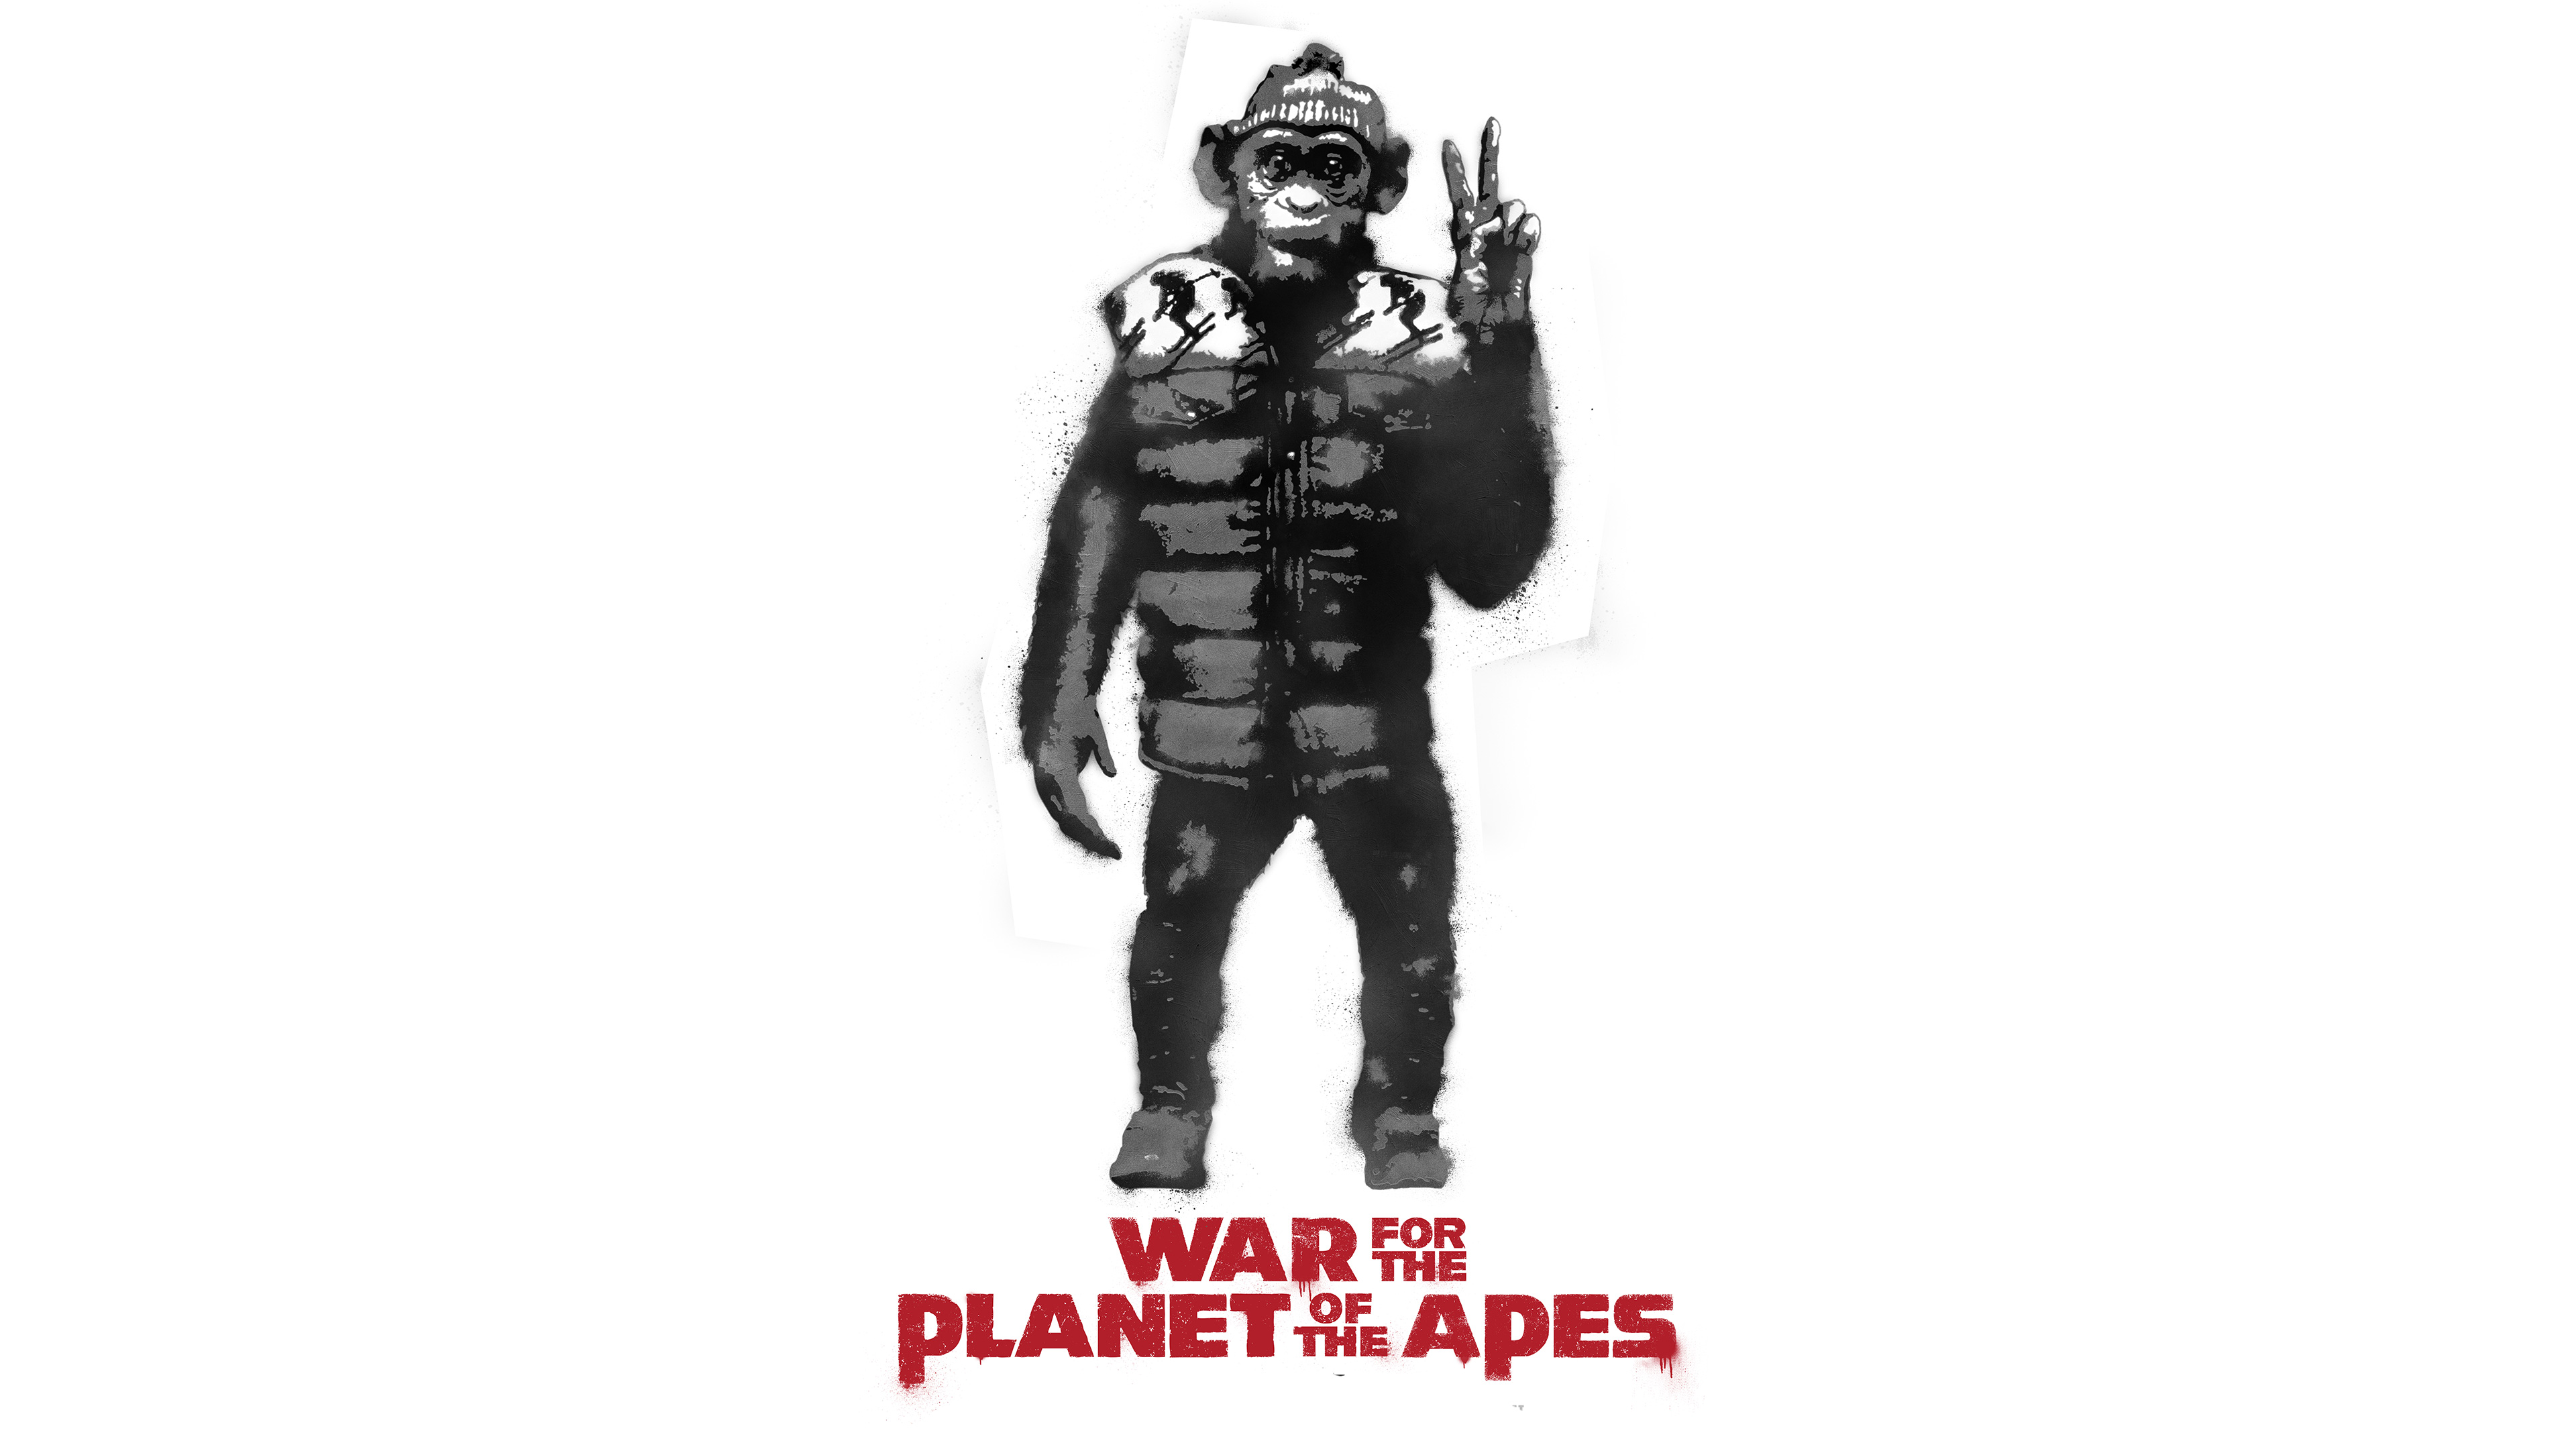 war for the planet of the apes wallpaper,action figure,fictional character,costume,toy,figurine